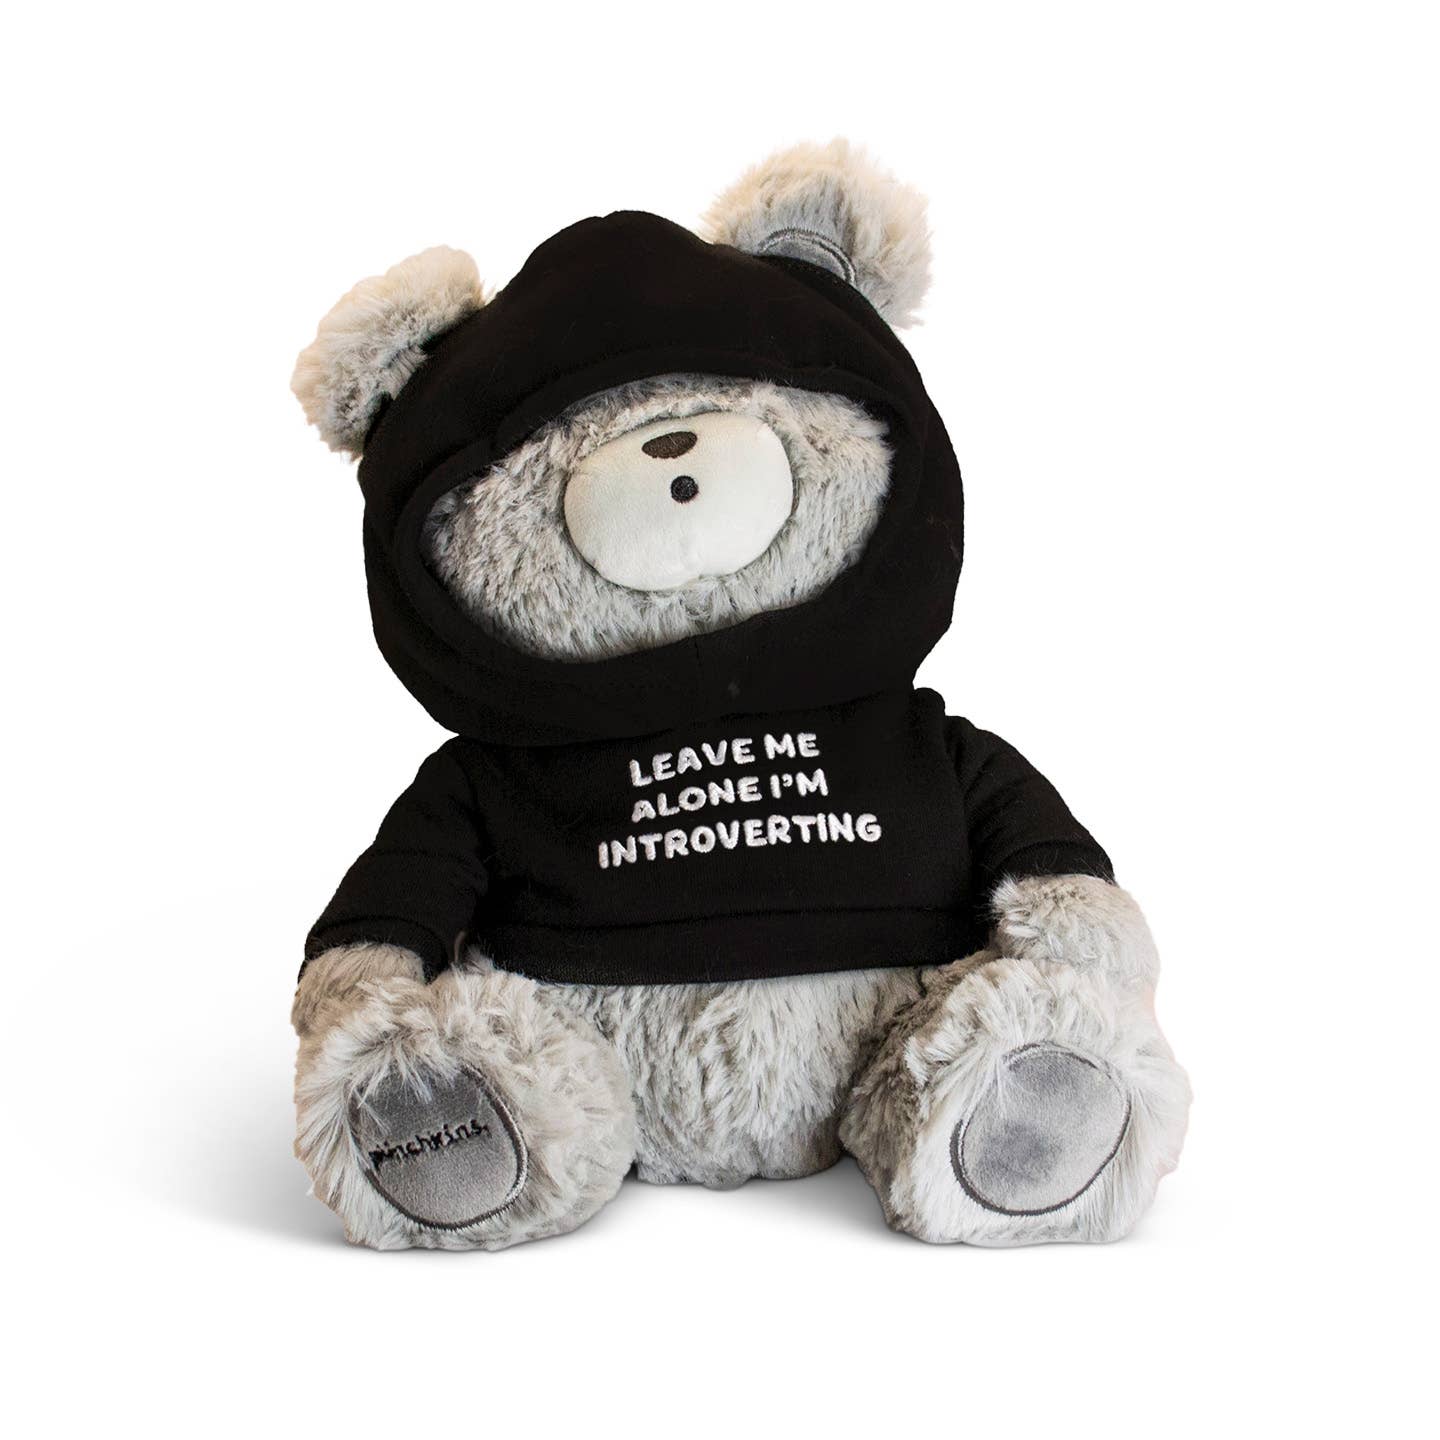 Punchkins "Leave Me Alone, I'm Introverting" Teddy Bear Plushie, Gift Kawaii Gifts 850042202722